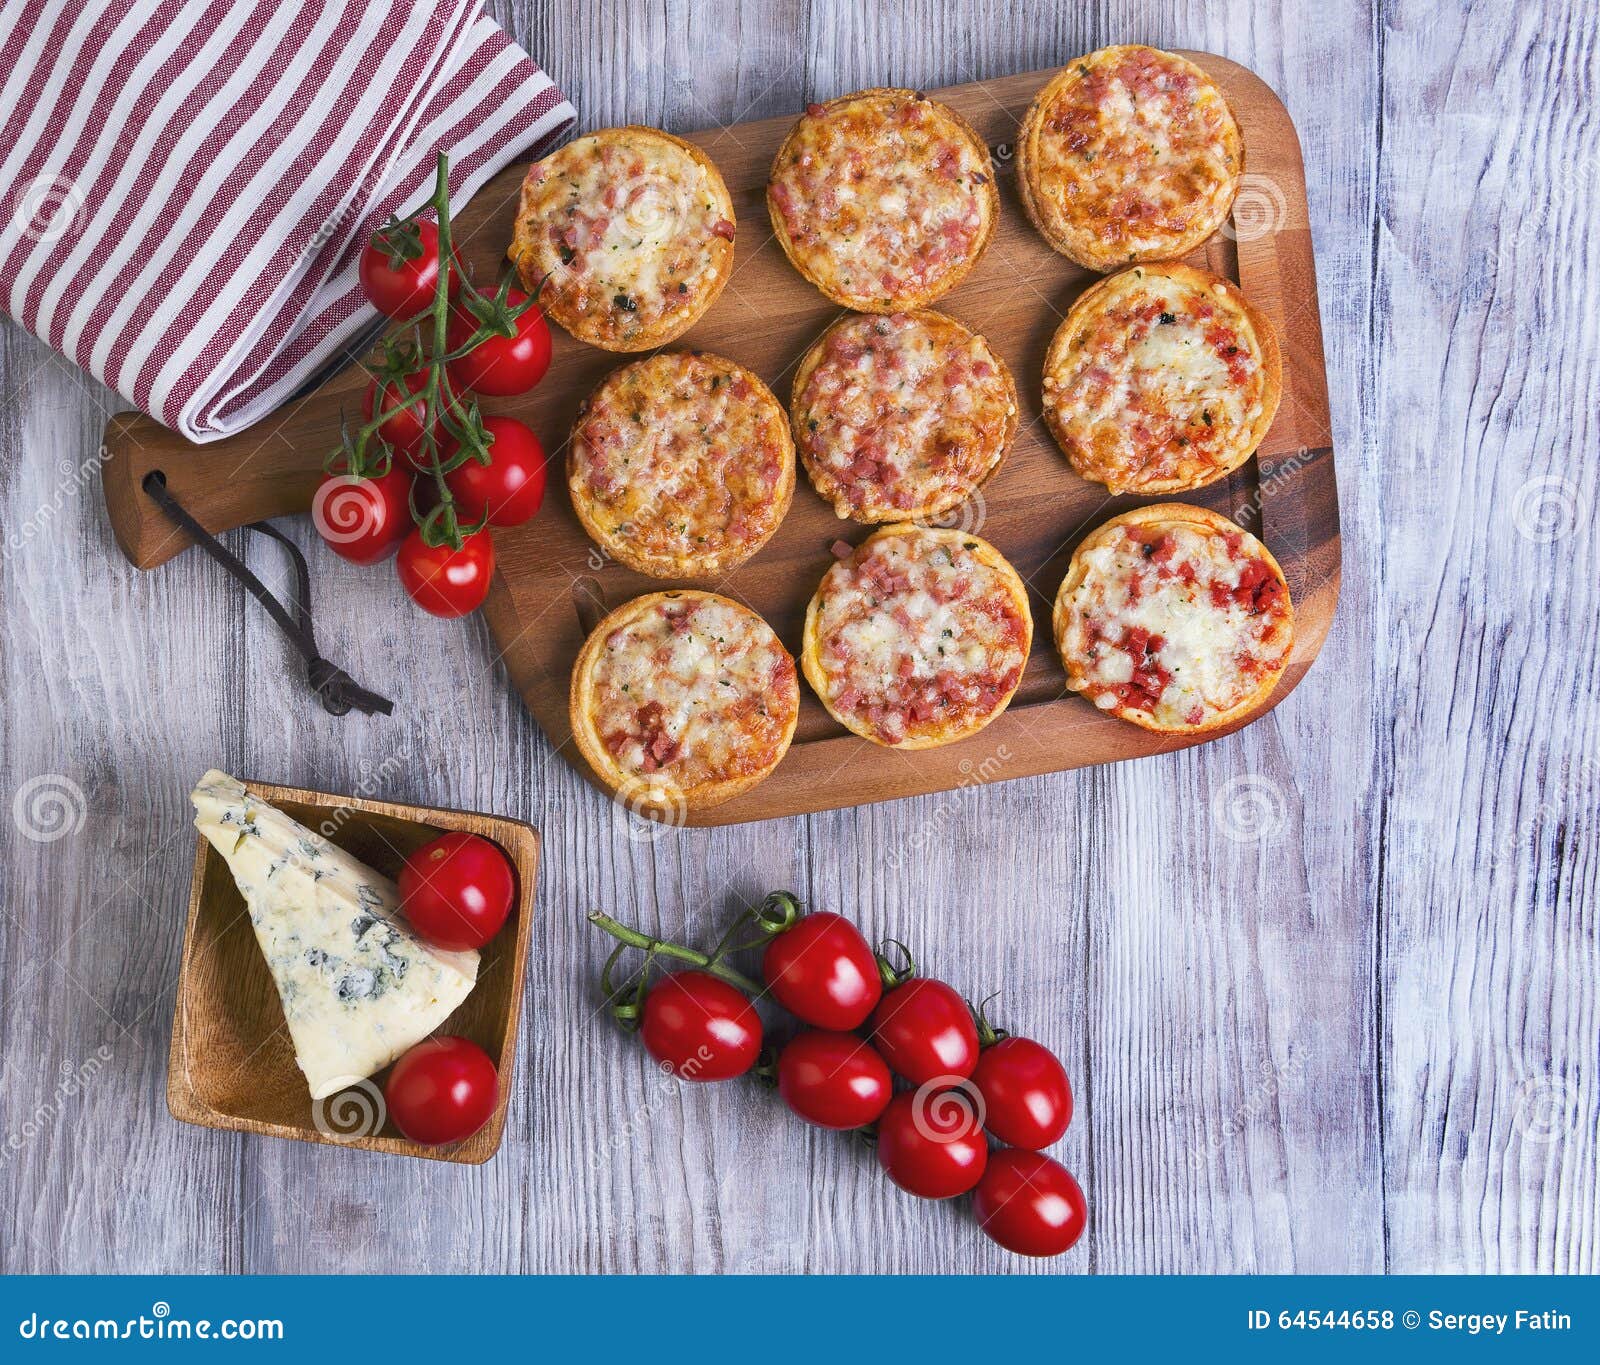 Mini Pizzas on a Wooden Table Stock Photo - Image of homemade, basil ...